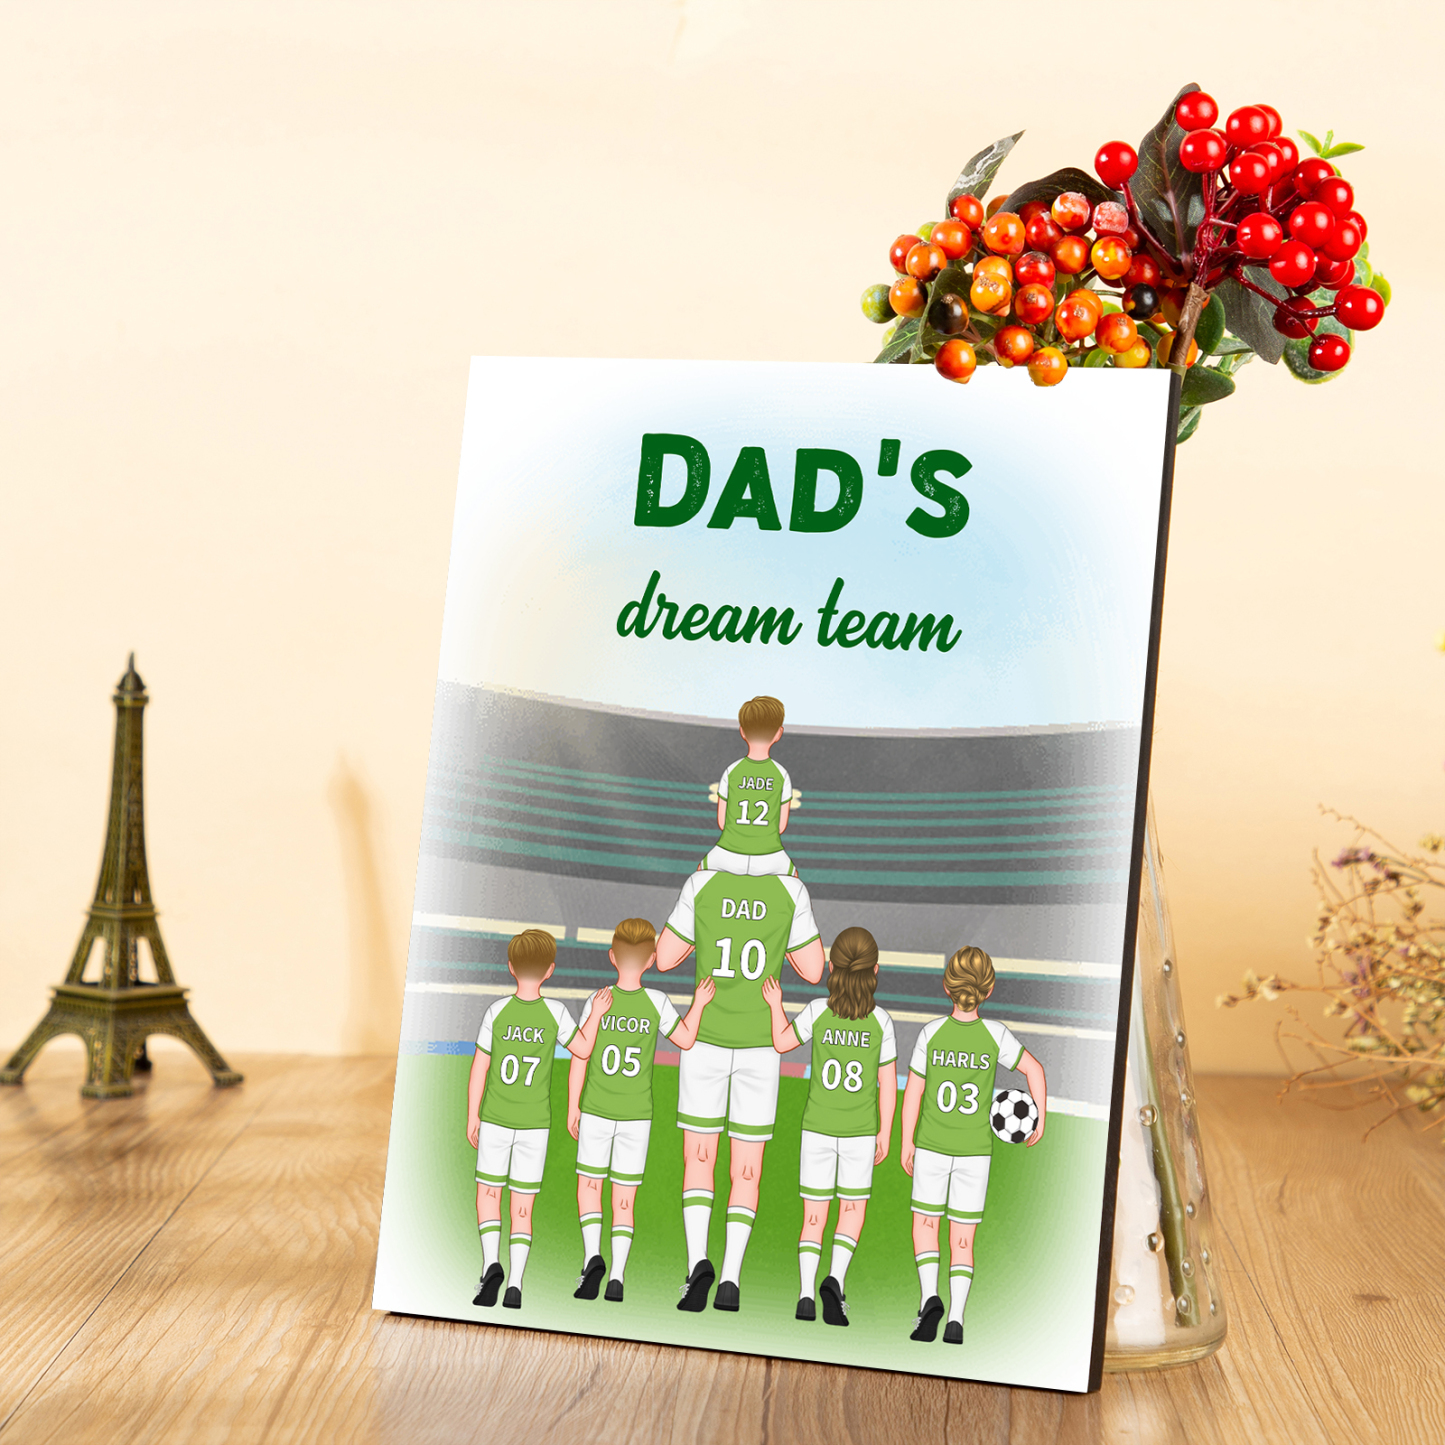 To My Dad - Wooden Frame Dad's Football Team 2-9 Personalized Name with Text